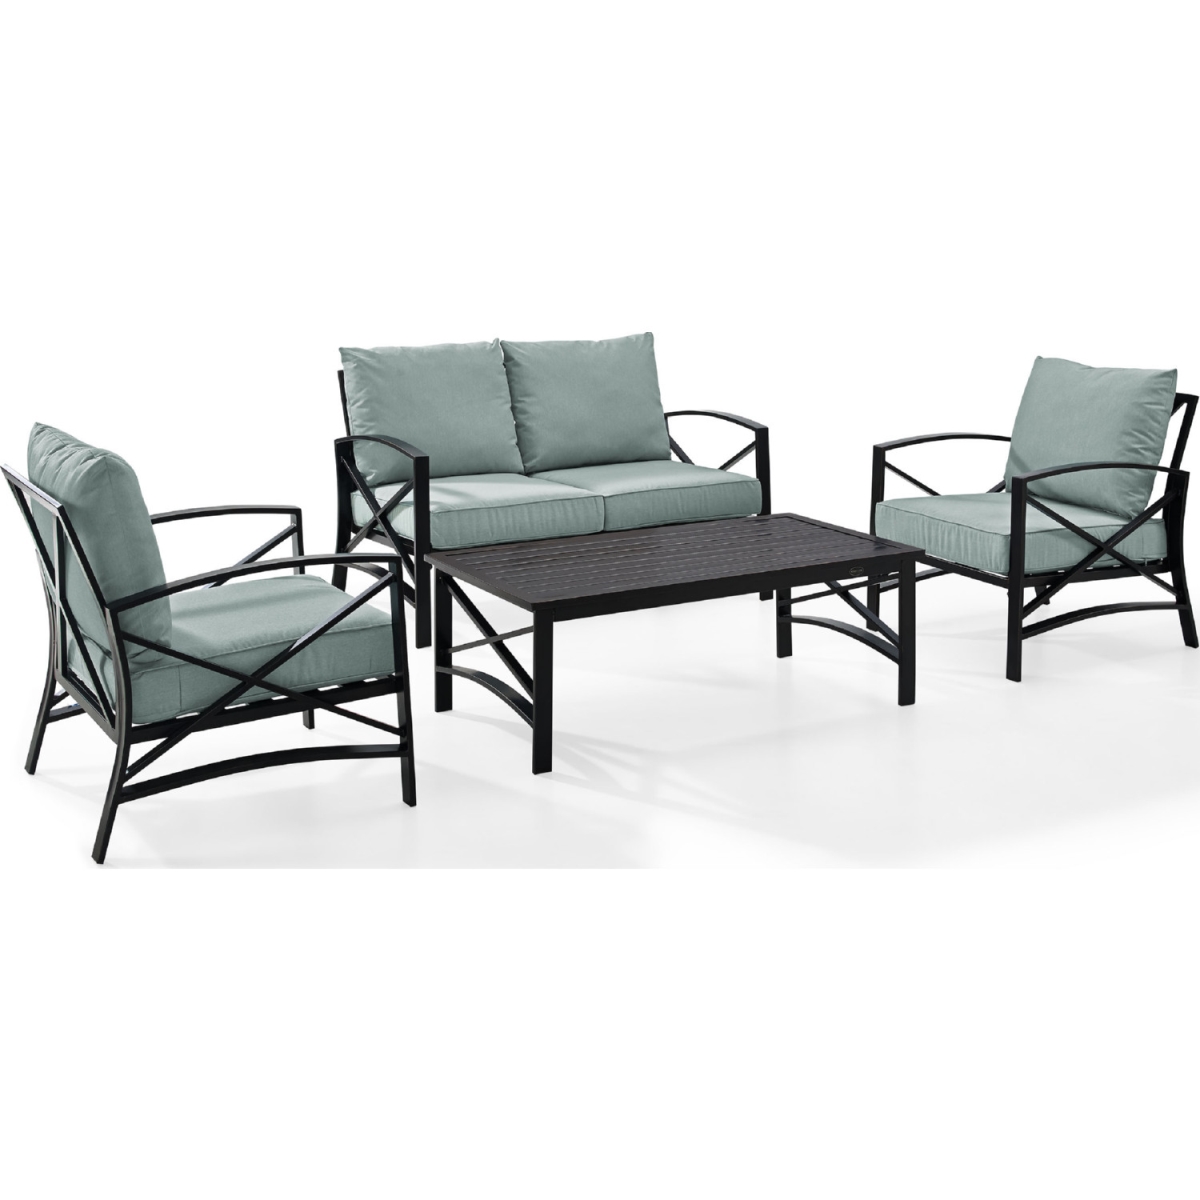 Ko60009bz-mi 4 Piece Kaplan Outdoor Seating Set With Mist Cushion - Loveseat, Two Chairs, Coffee Table